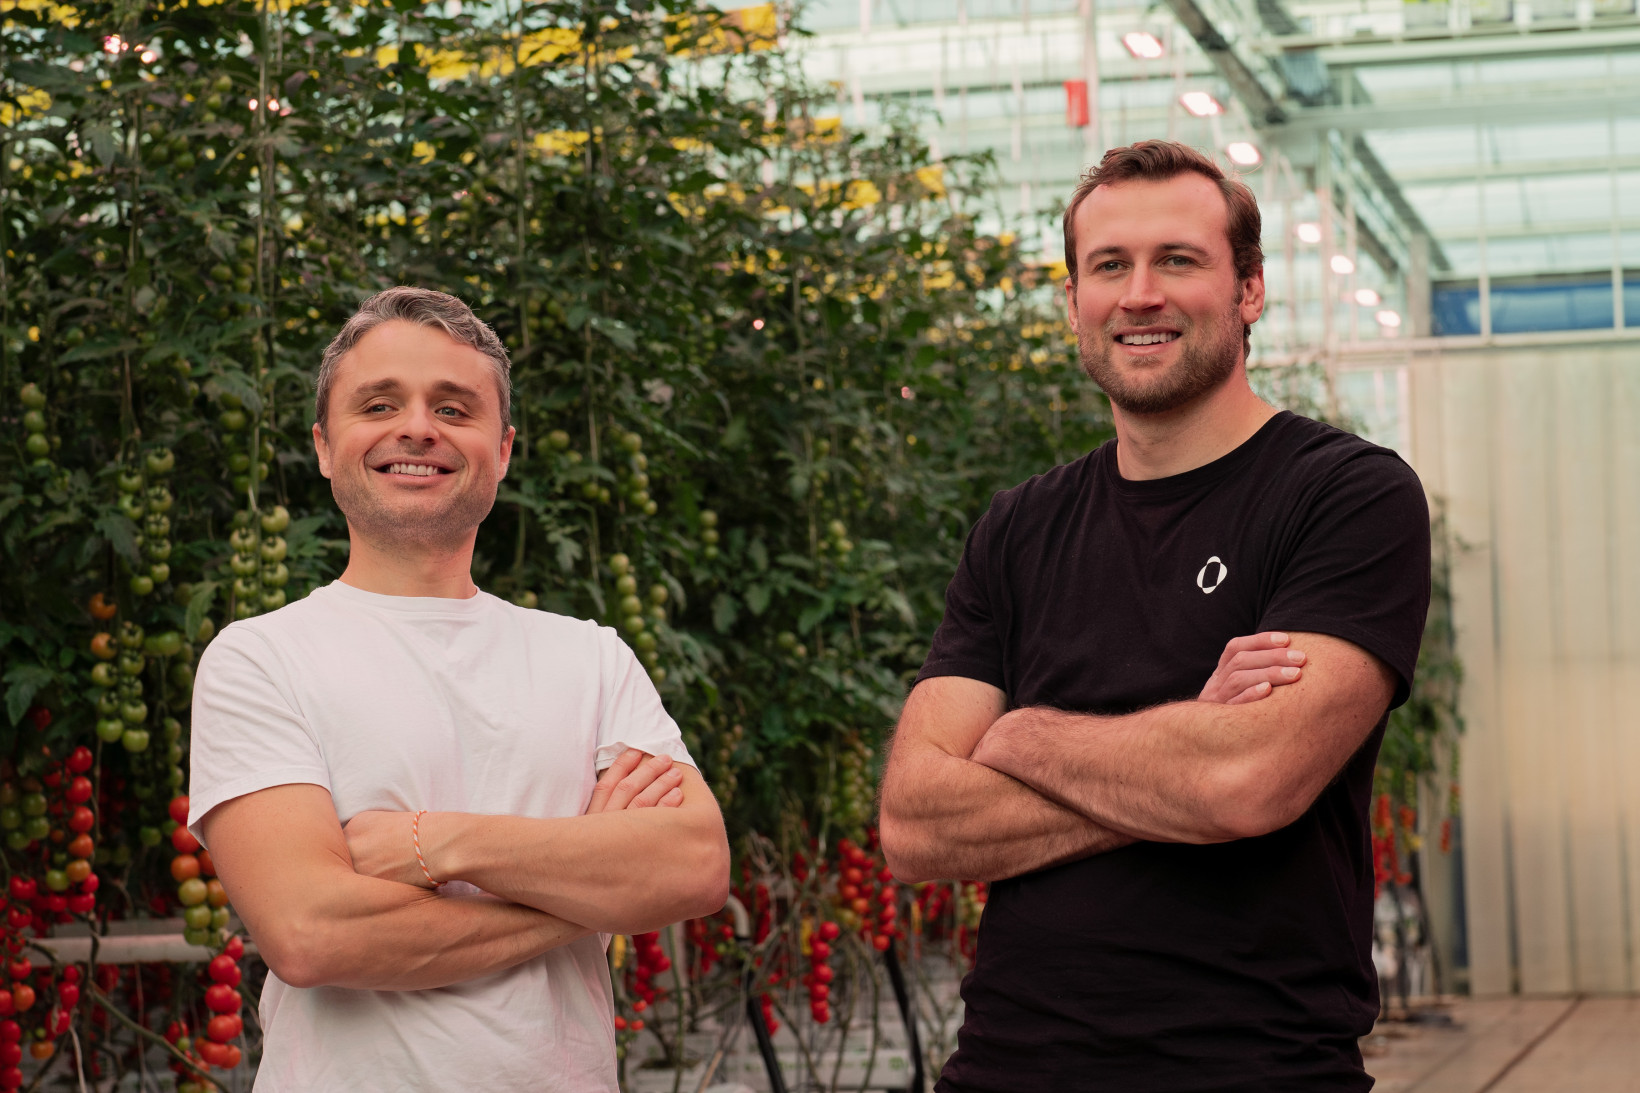 The founders of Source.ag standing in a greenhouse in front of plants, both are white men and one is wearing a white t-shirt and the other a black oned